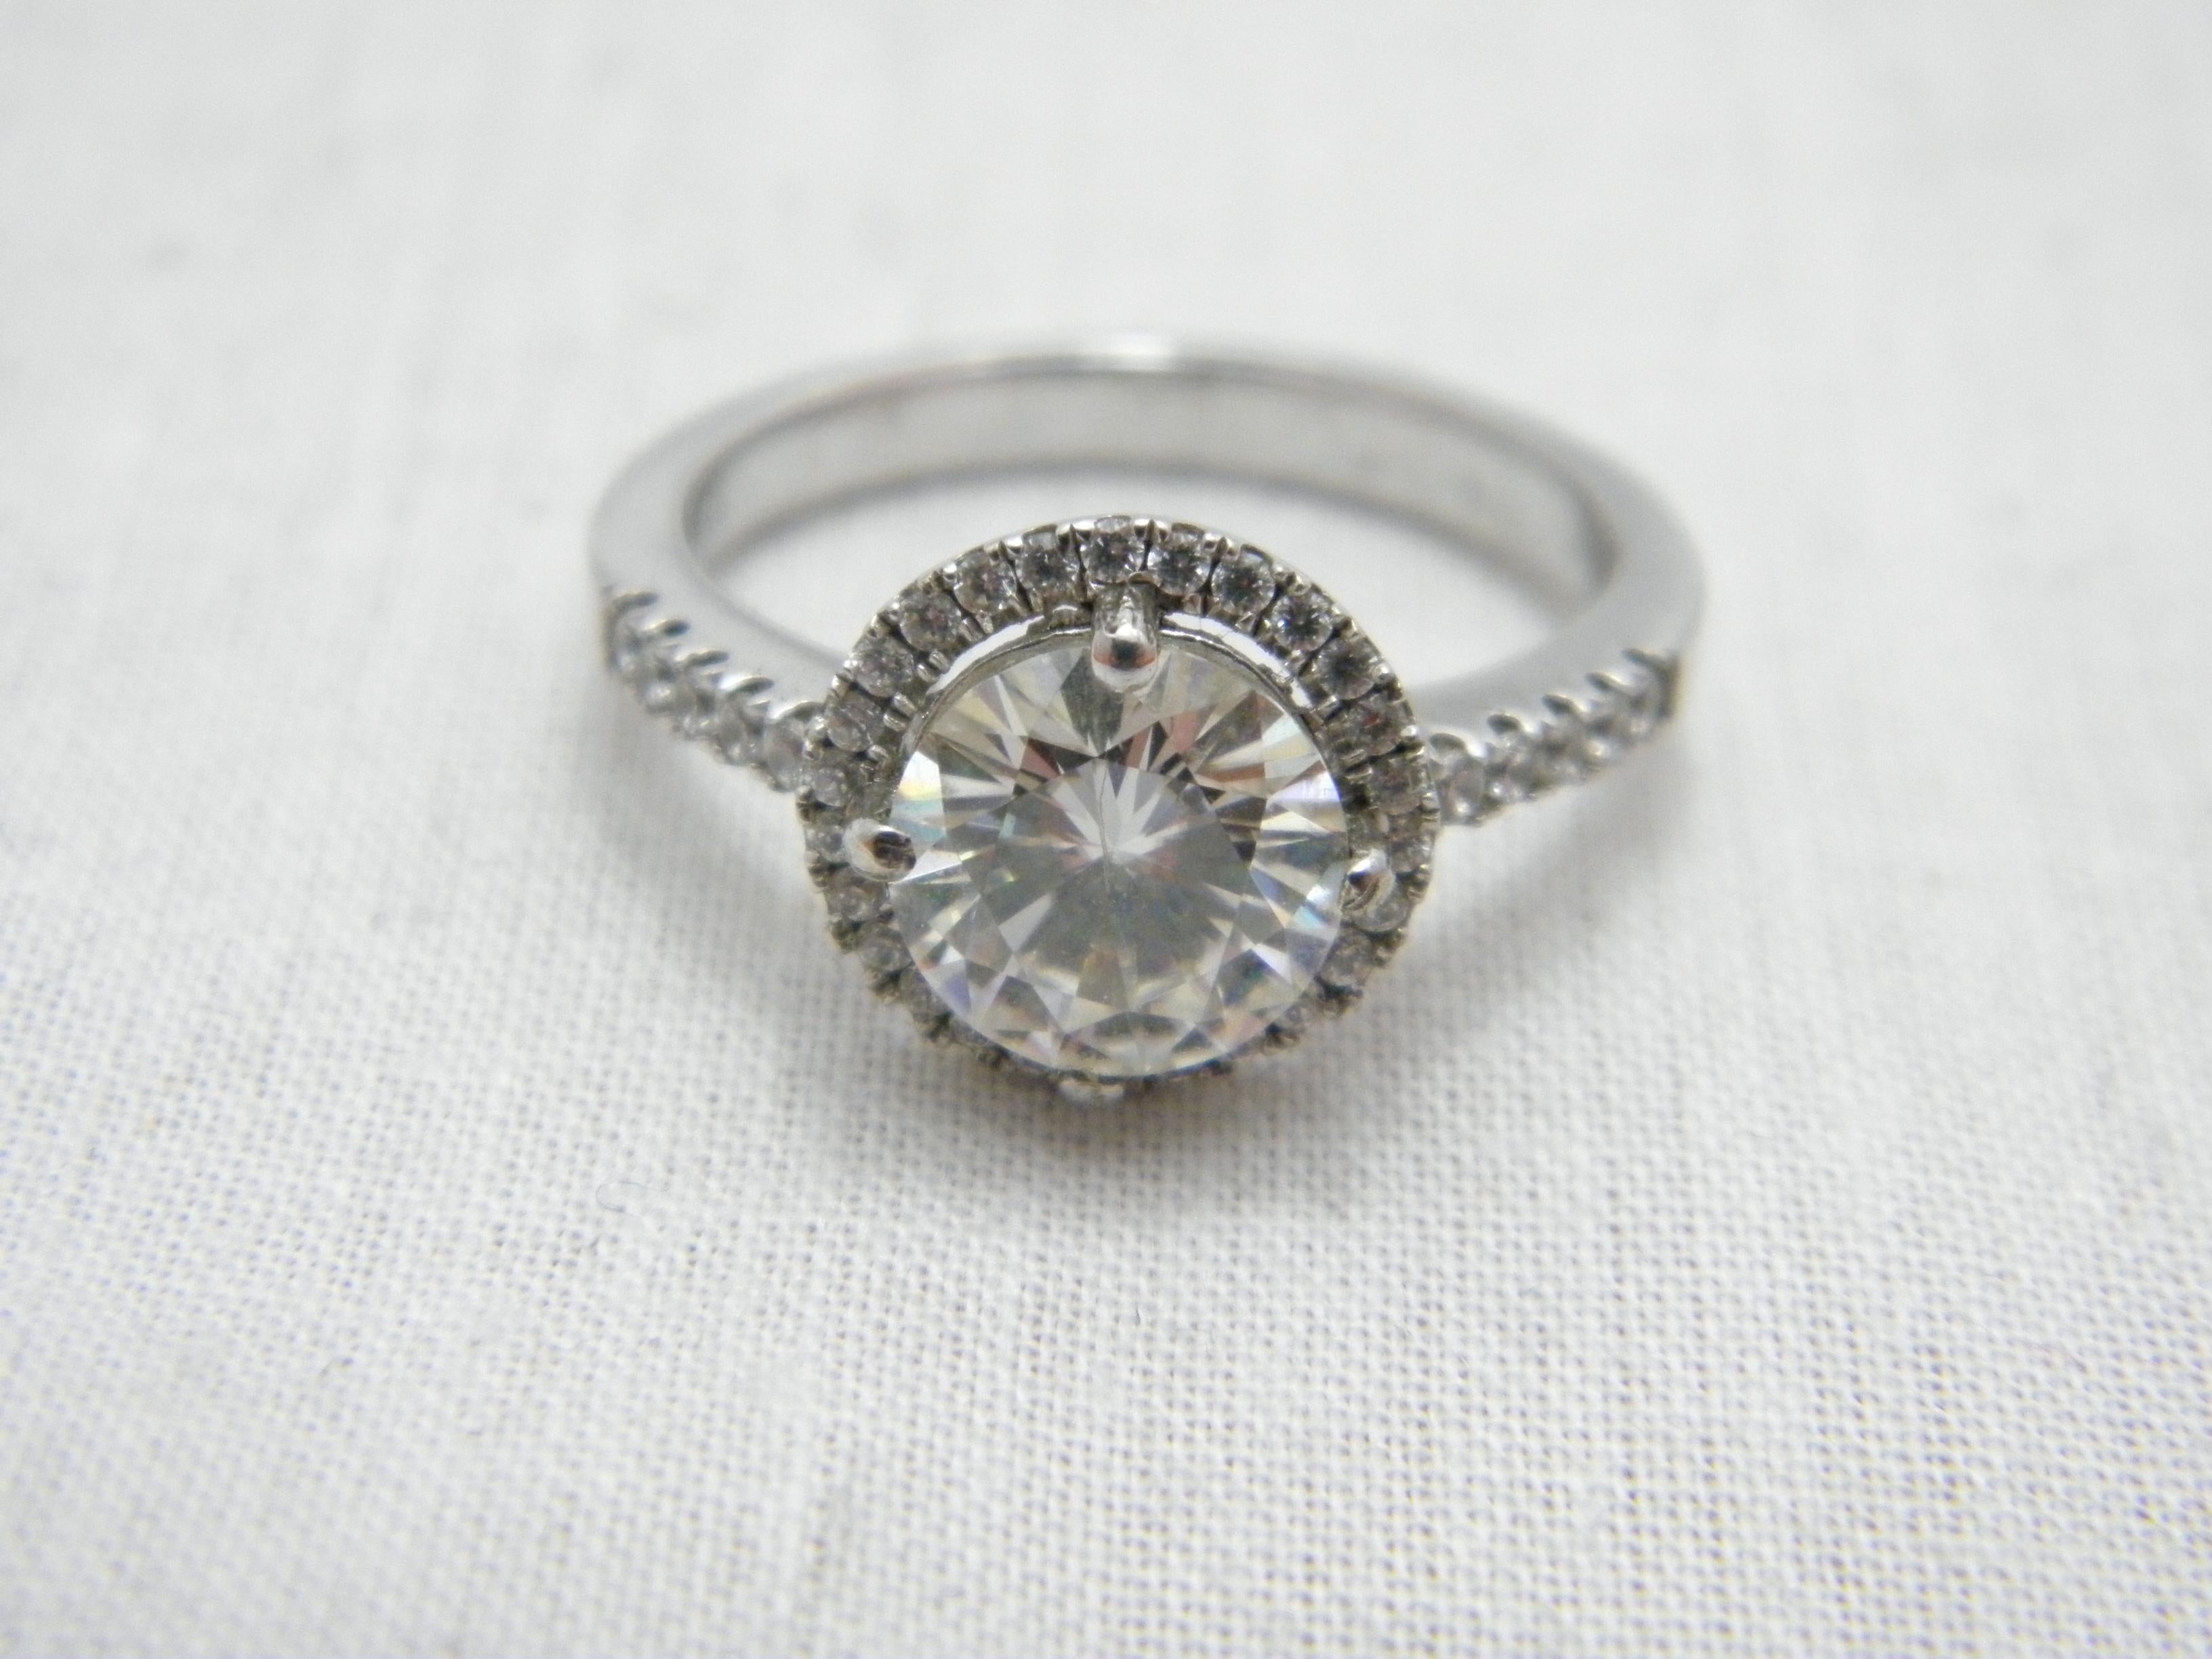 
If you have landed on this page then you have an eye for beauty.

On offer is this gorgeous
VINTAGE 950 PLATINUM DIAMOND HALO ENGAGEMENT (STYLE) RING

Crafted from solid Platinum (950/000)
and bespoke assay marked in Hatton Garden, UK dating to